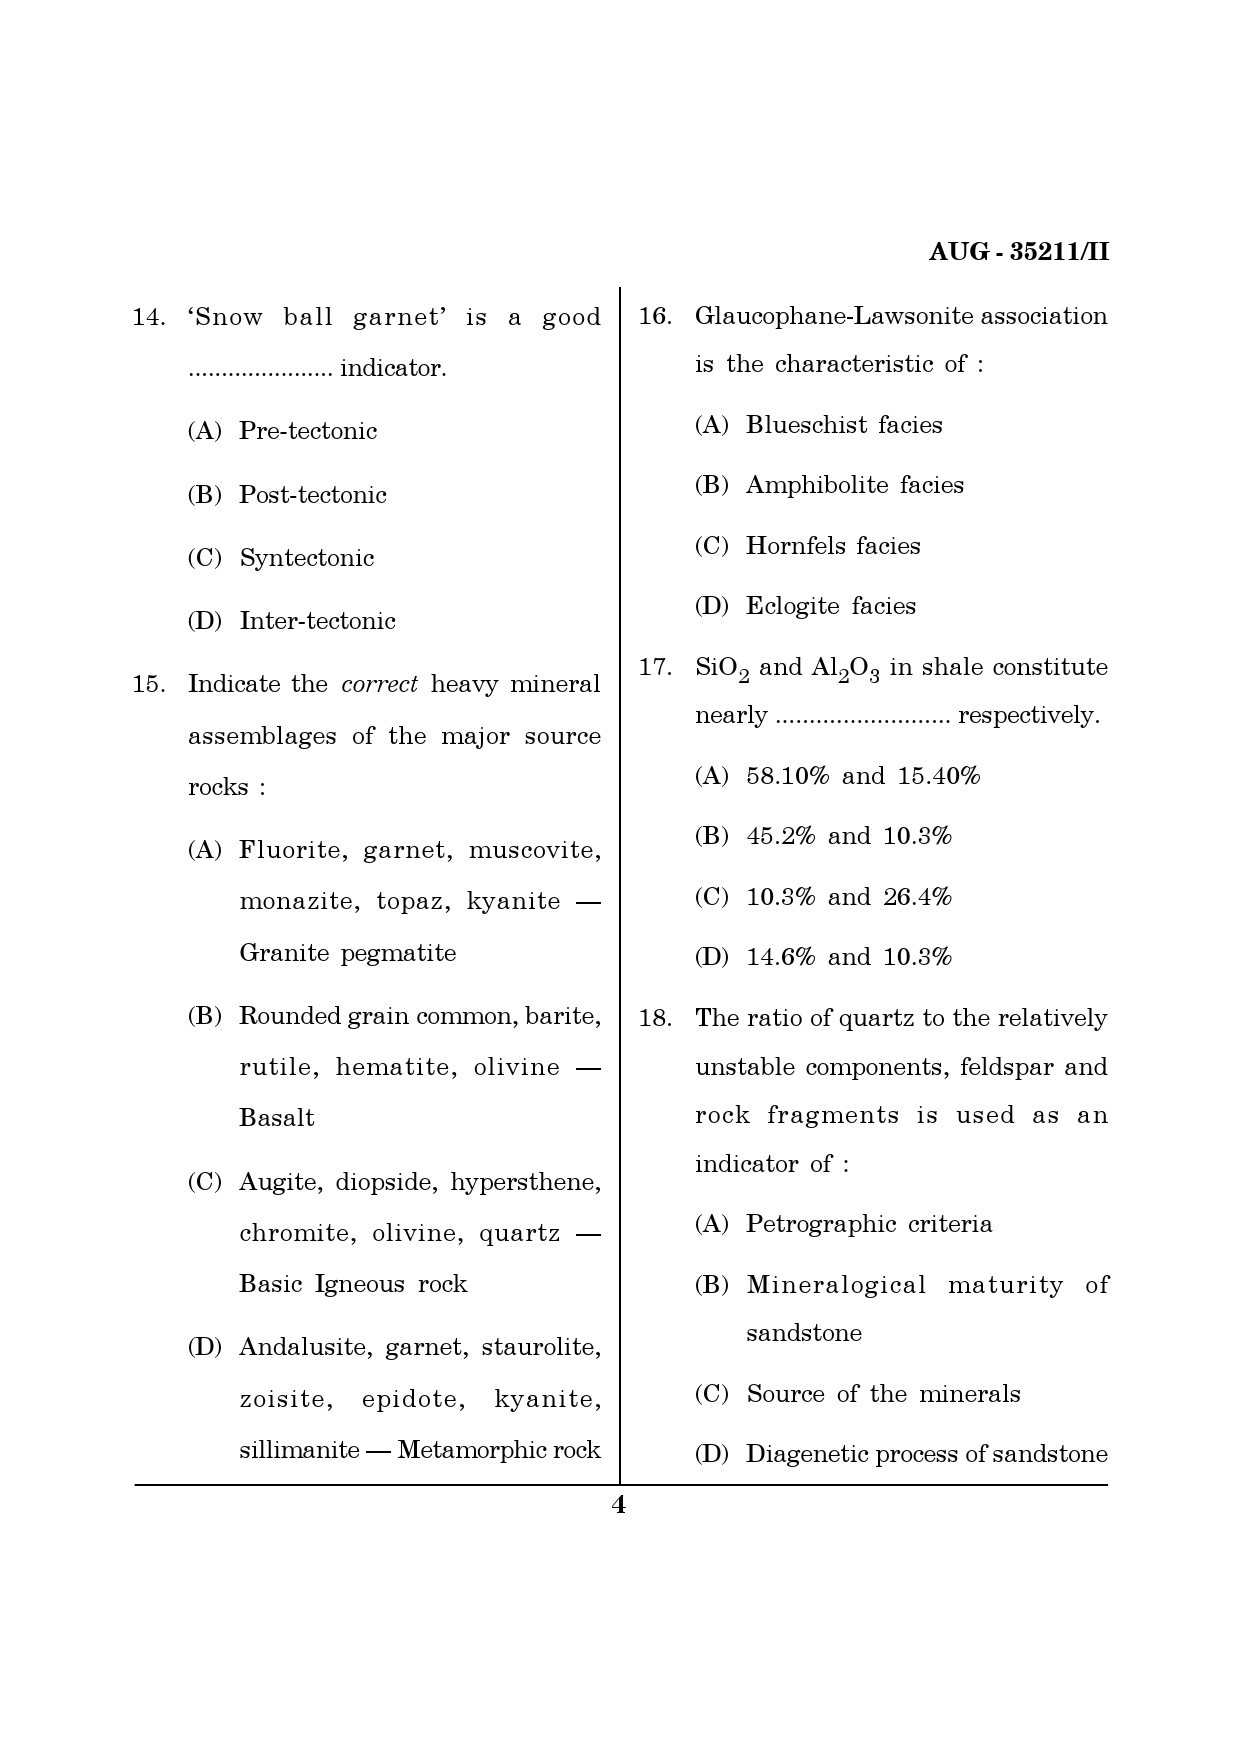 Maharashtra SET Earth Atmospheric Ocean Planetary Science Question Paper II August 2011 4